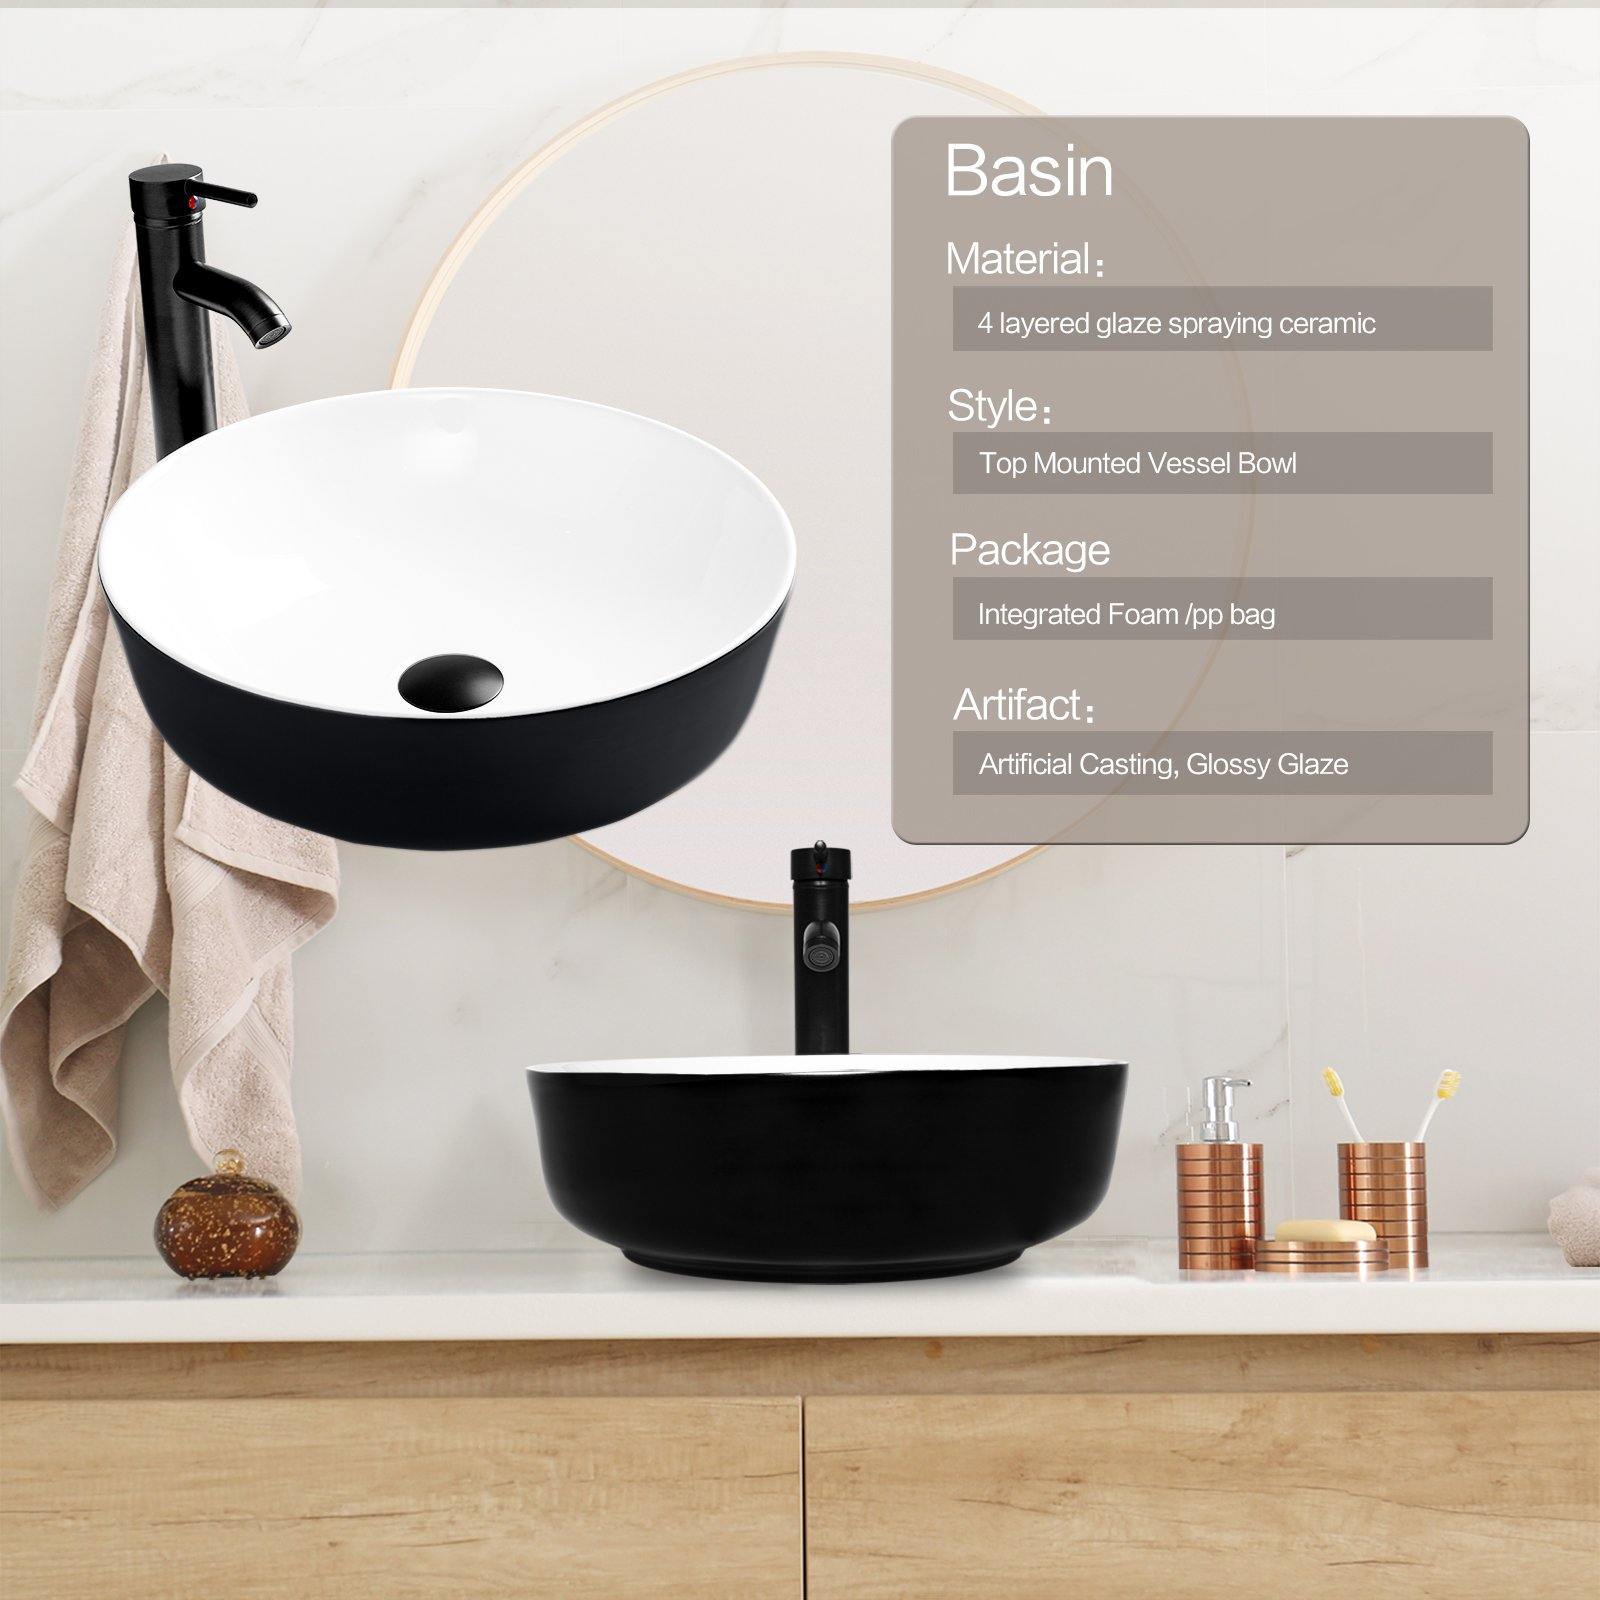 Elecwish Vessel Sinks Ceramic Bathroom Sink with Faucet Drain Combo,Round Black and White basin specification